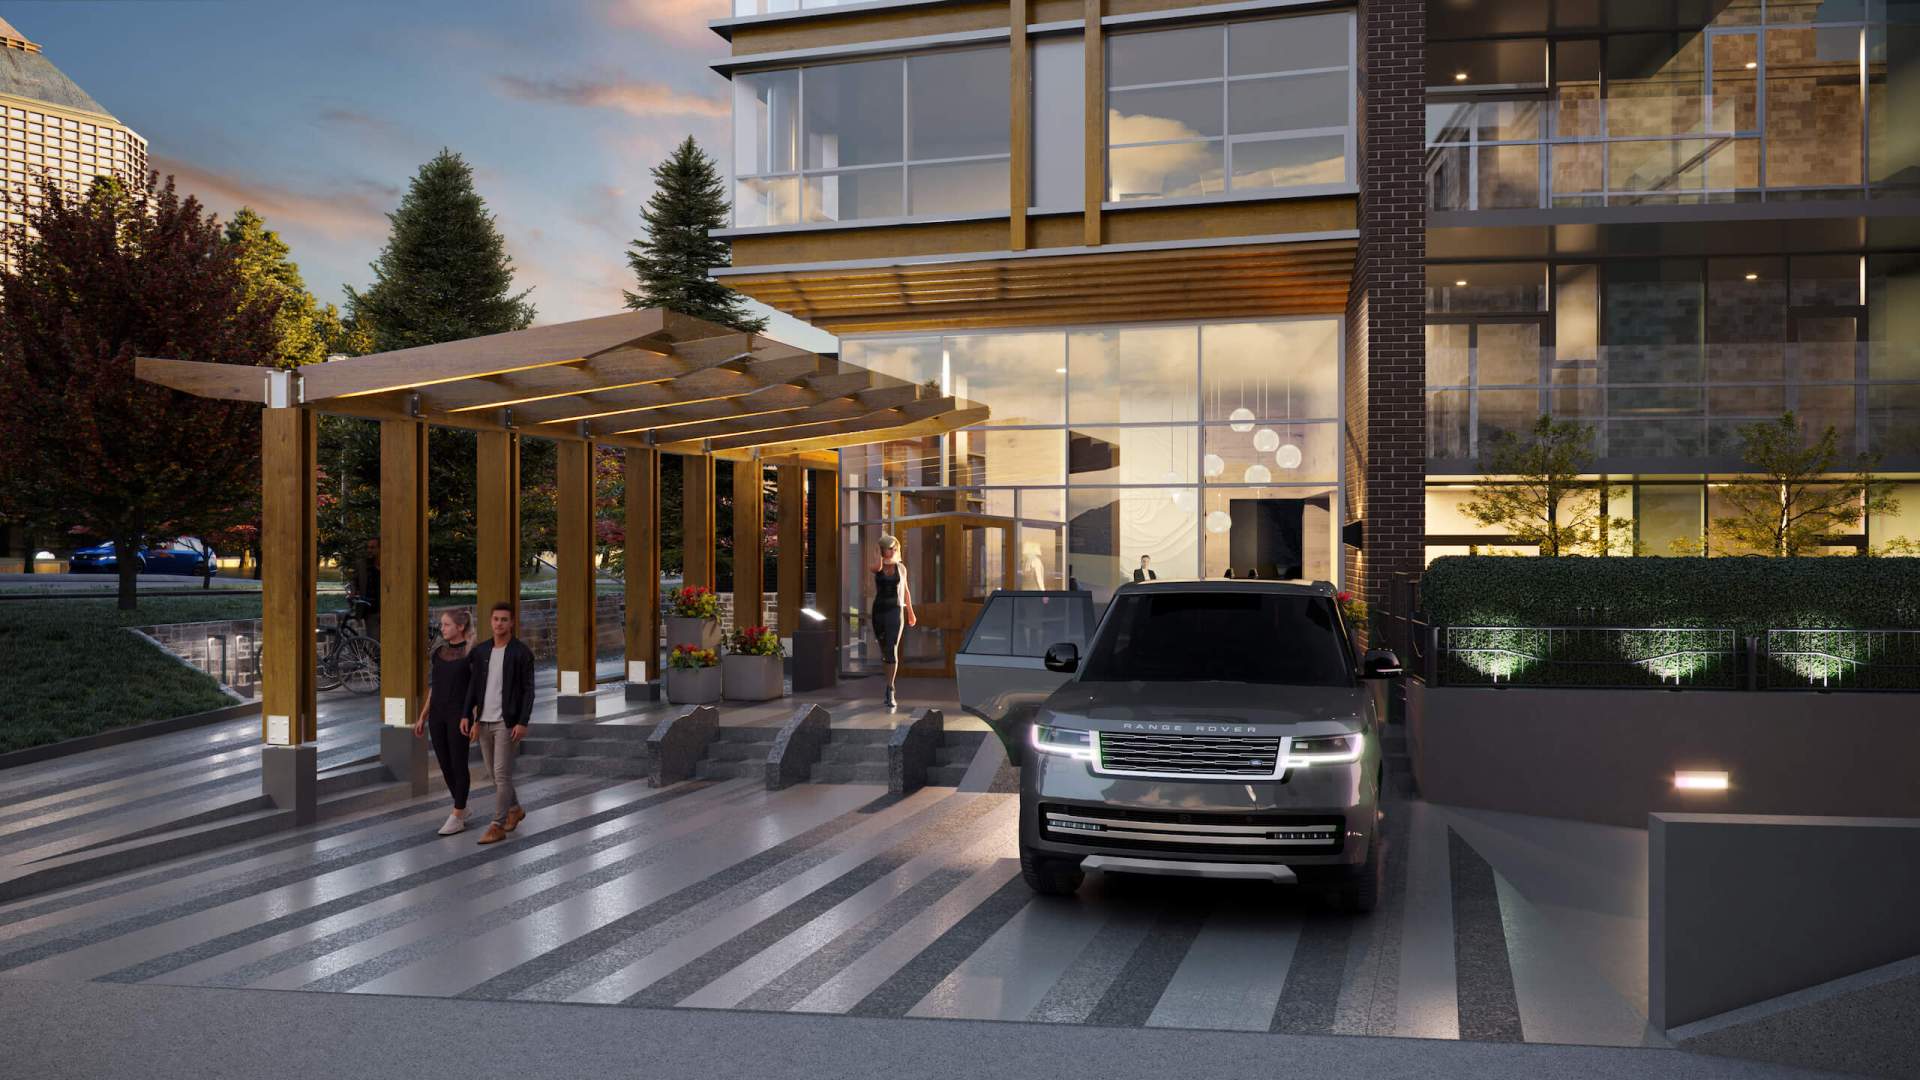 Exclusive amenities for residents include a personalized concierge and Range Rover town car service.